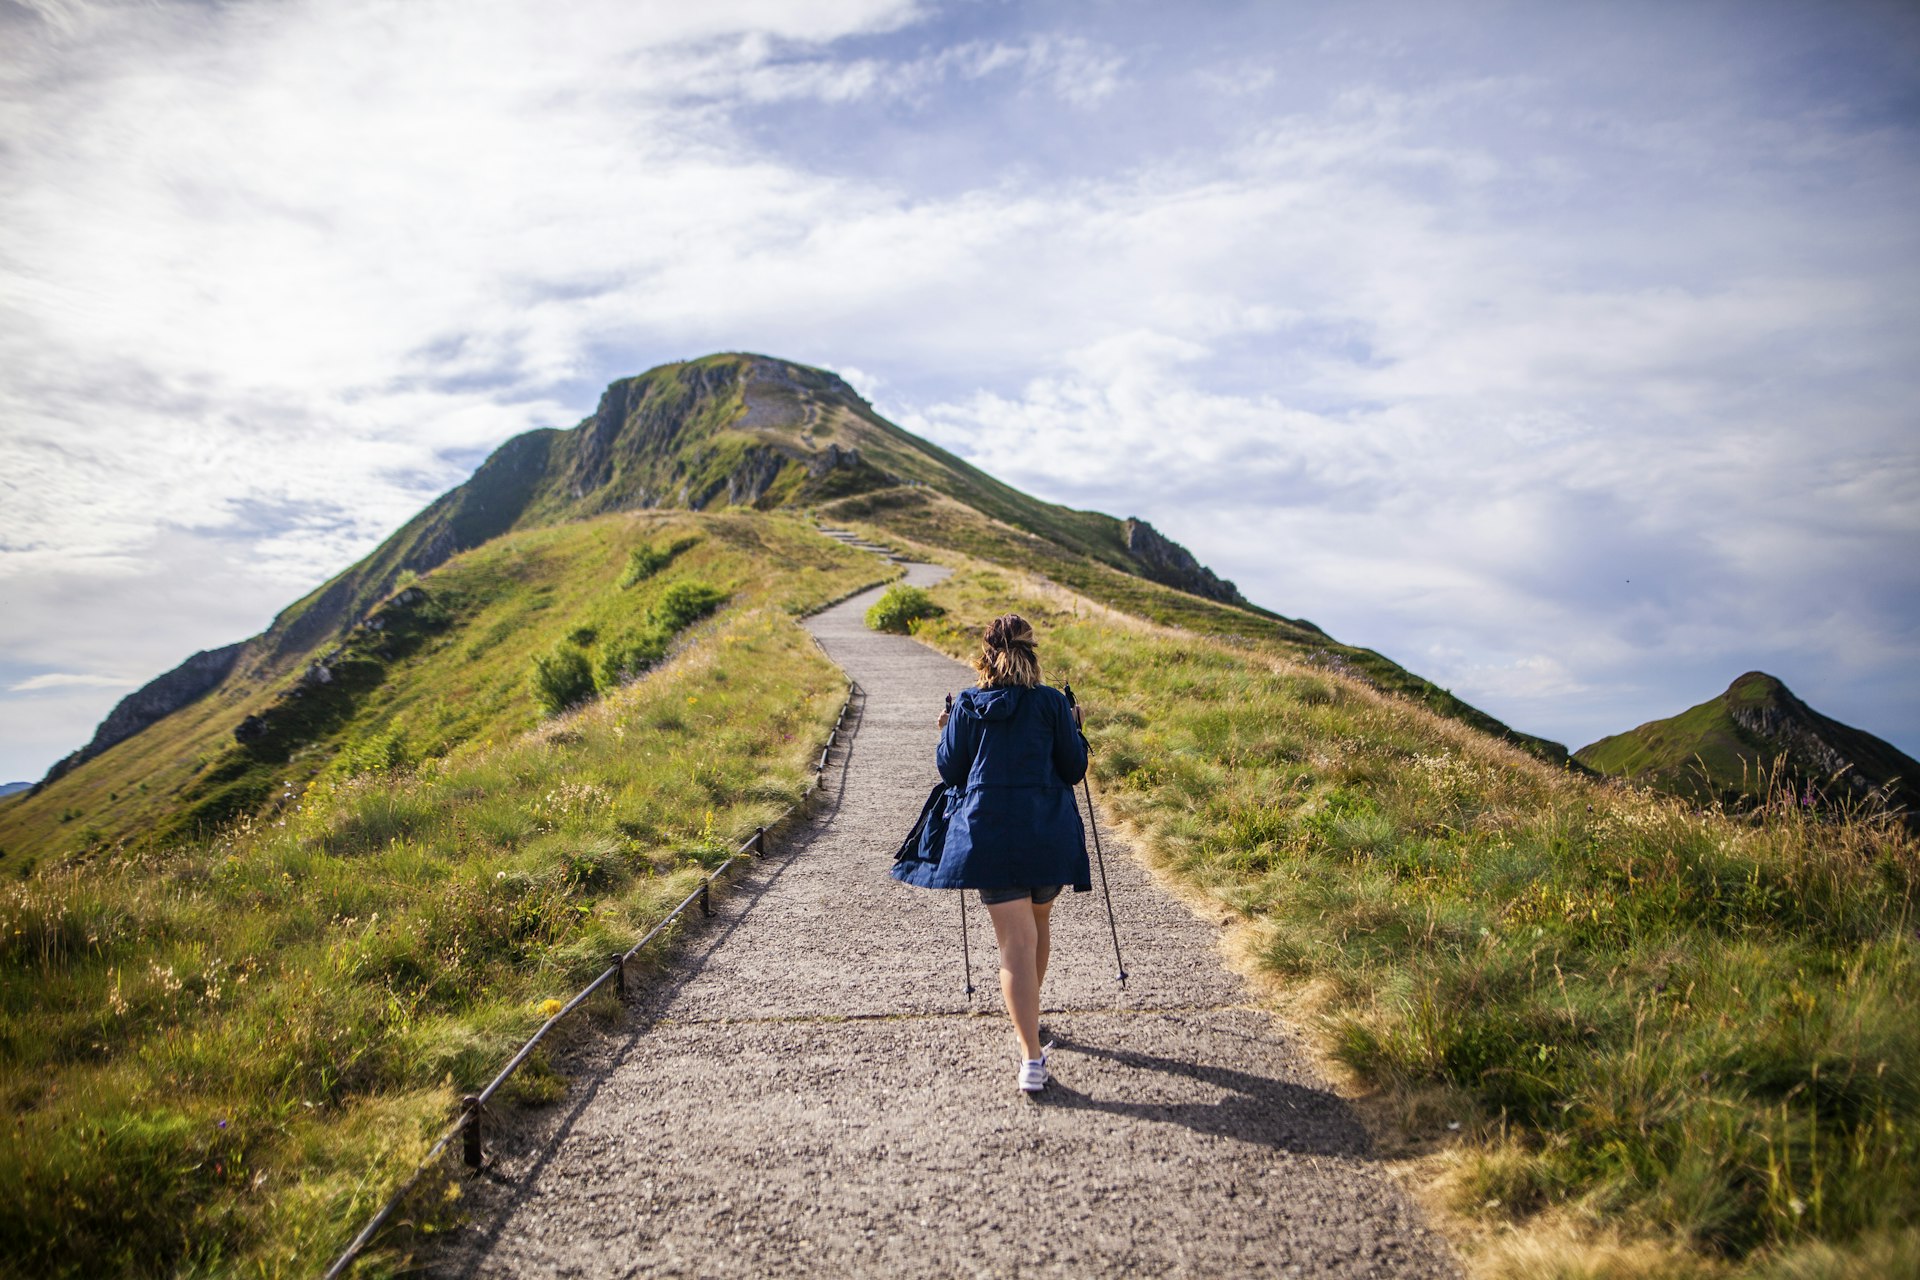 A woman hikes up a path towards a mountain peak